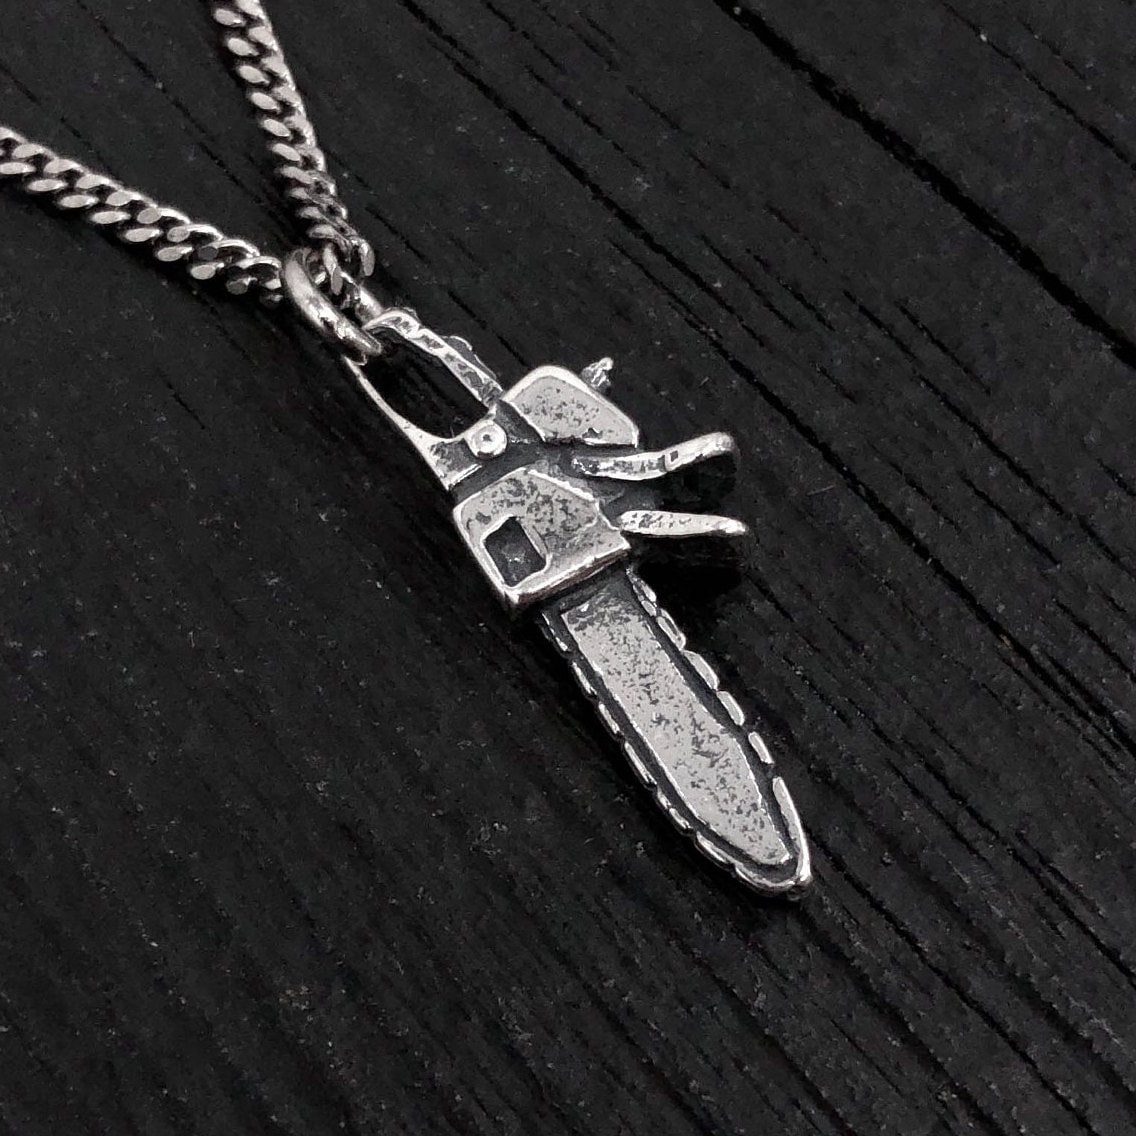 Sterling Silver Chainsaw Necklace Chainsaw Charm Necklace